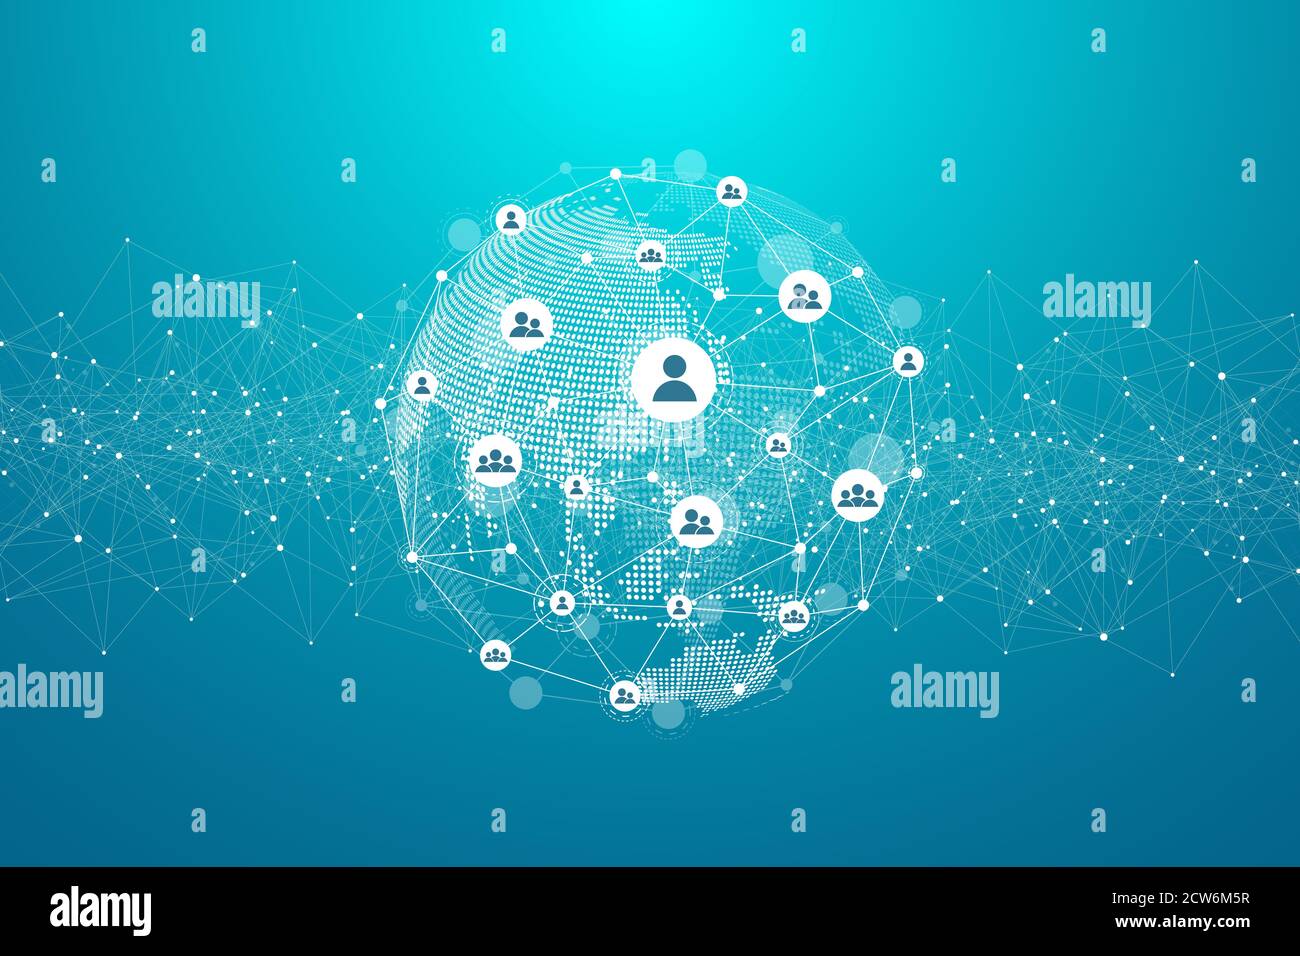 Global network connection concept. Big data visualization. Social network communication in the global computer networks. Internet technology. Business Stock Photo